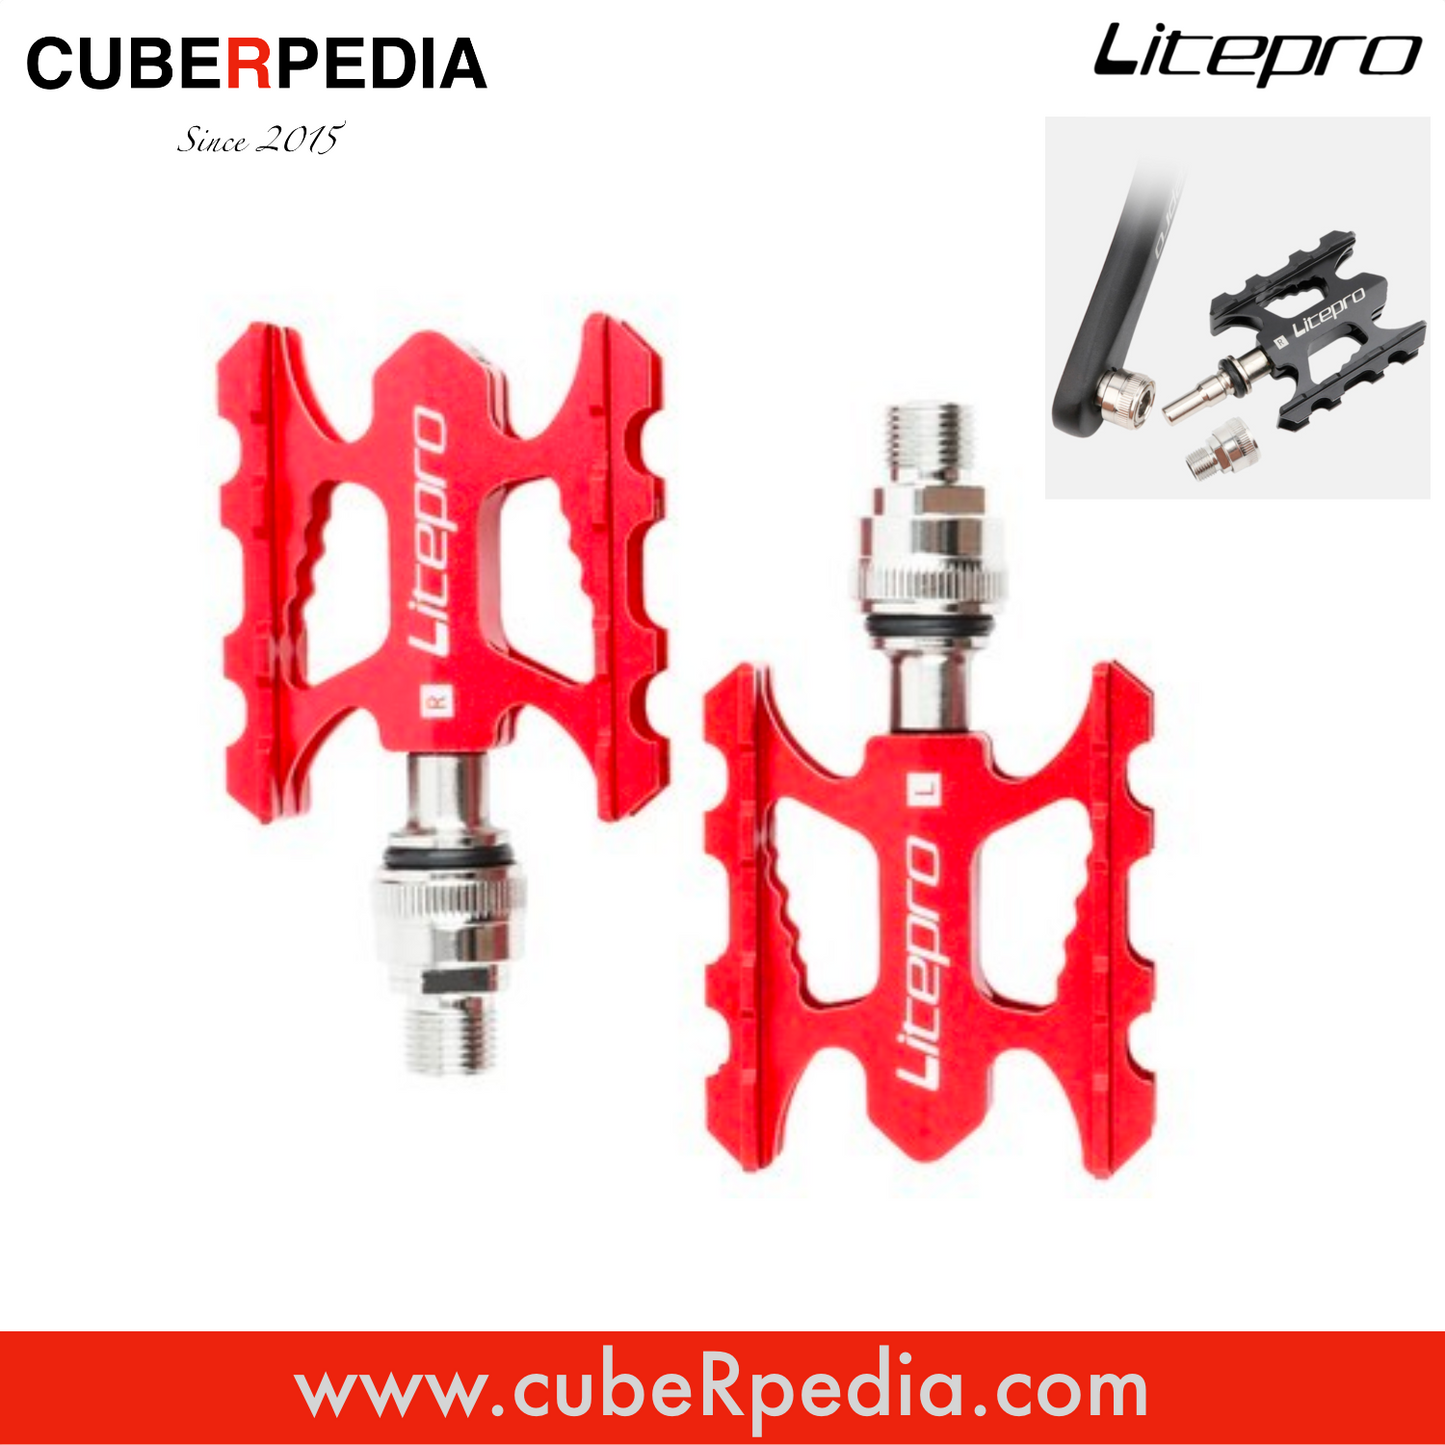 Litepro Quick Release Pedals - Red